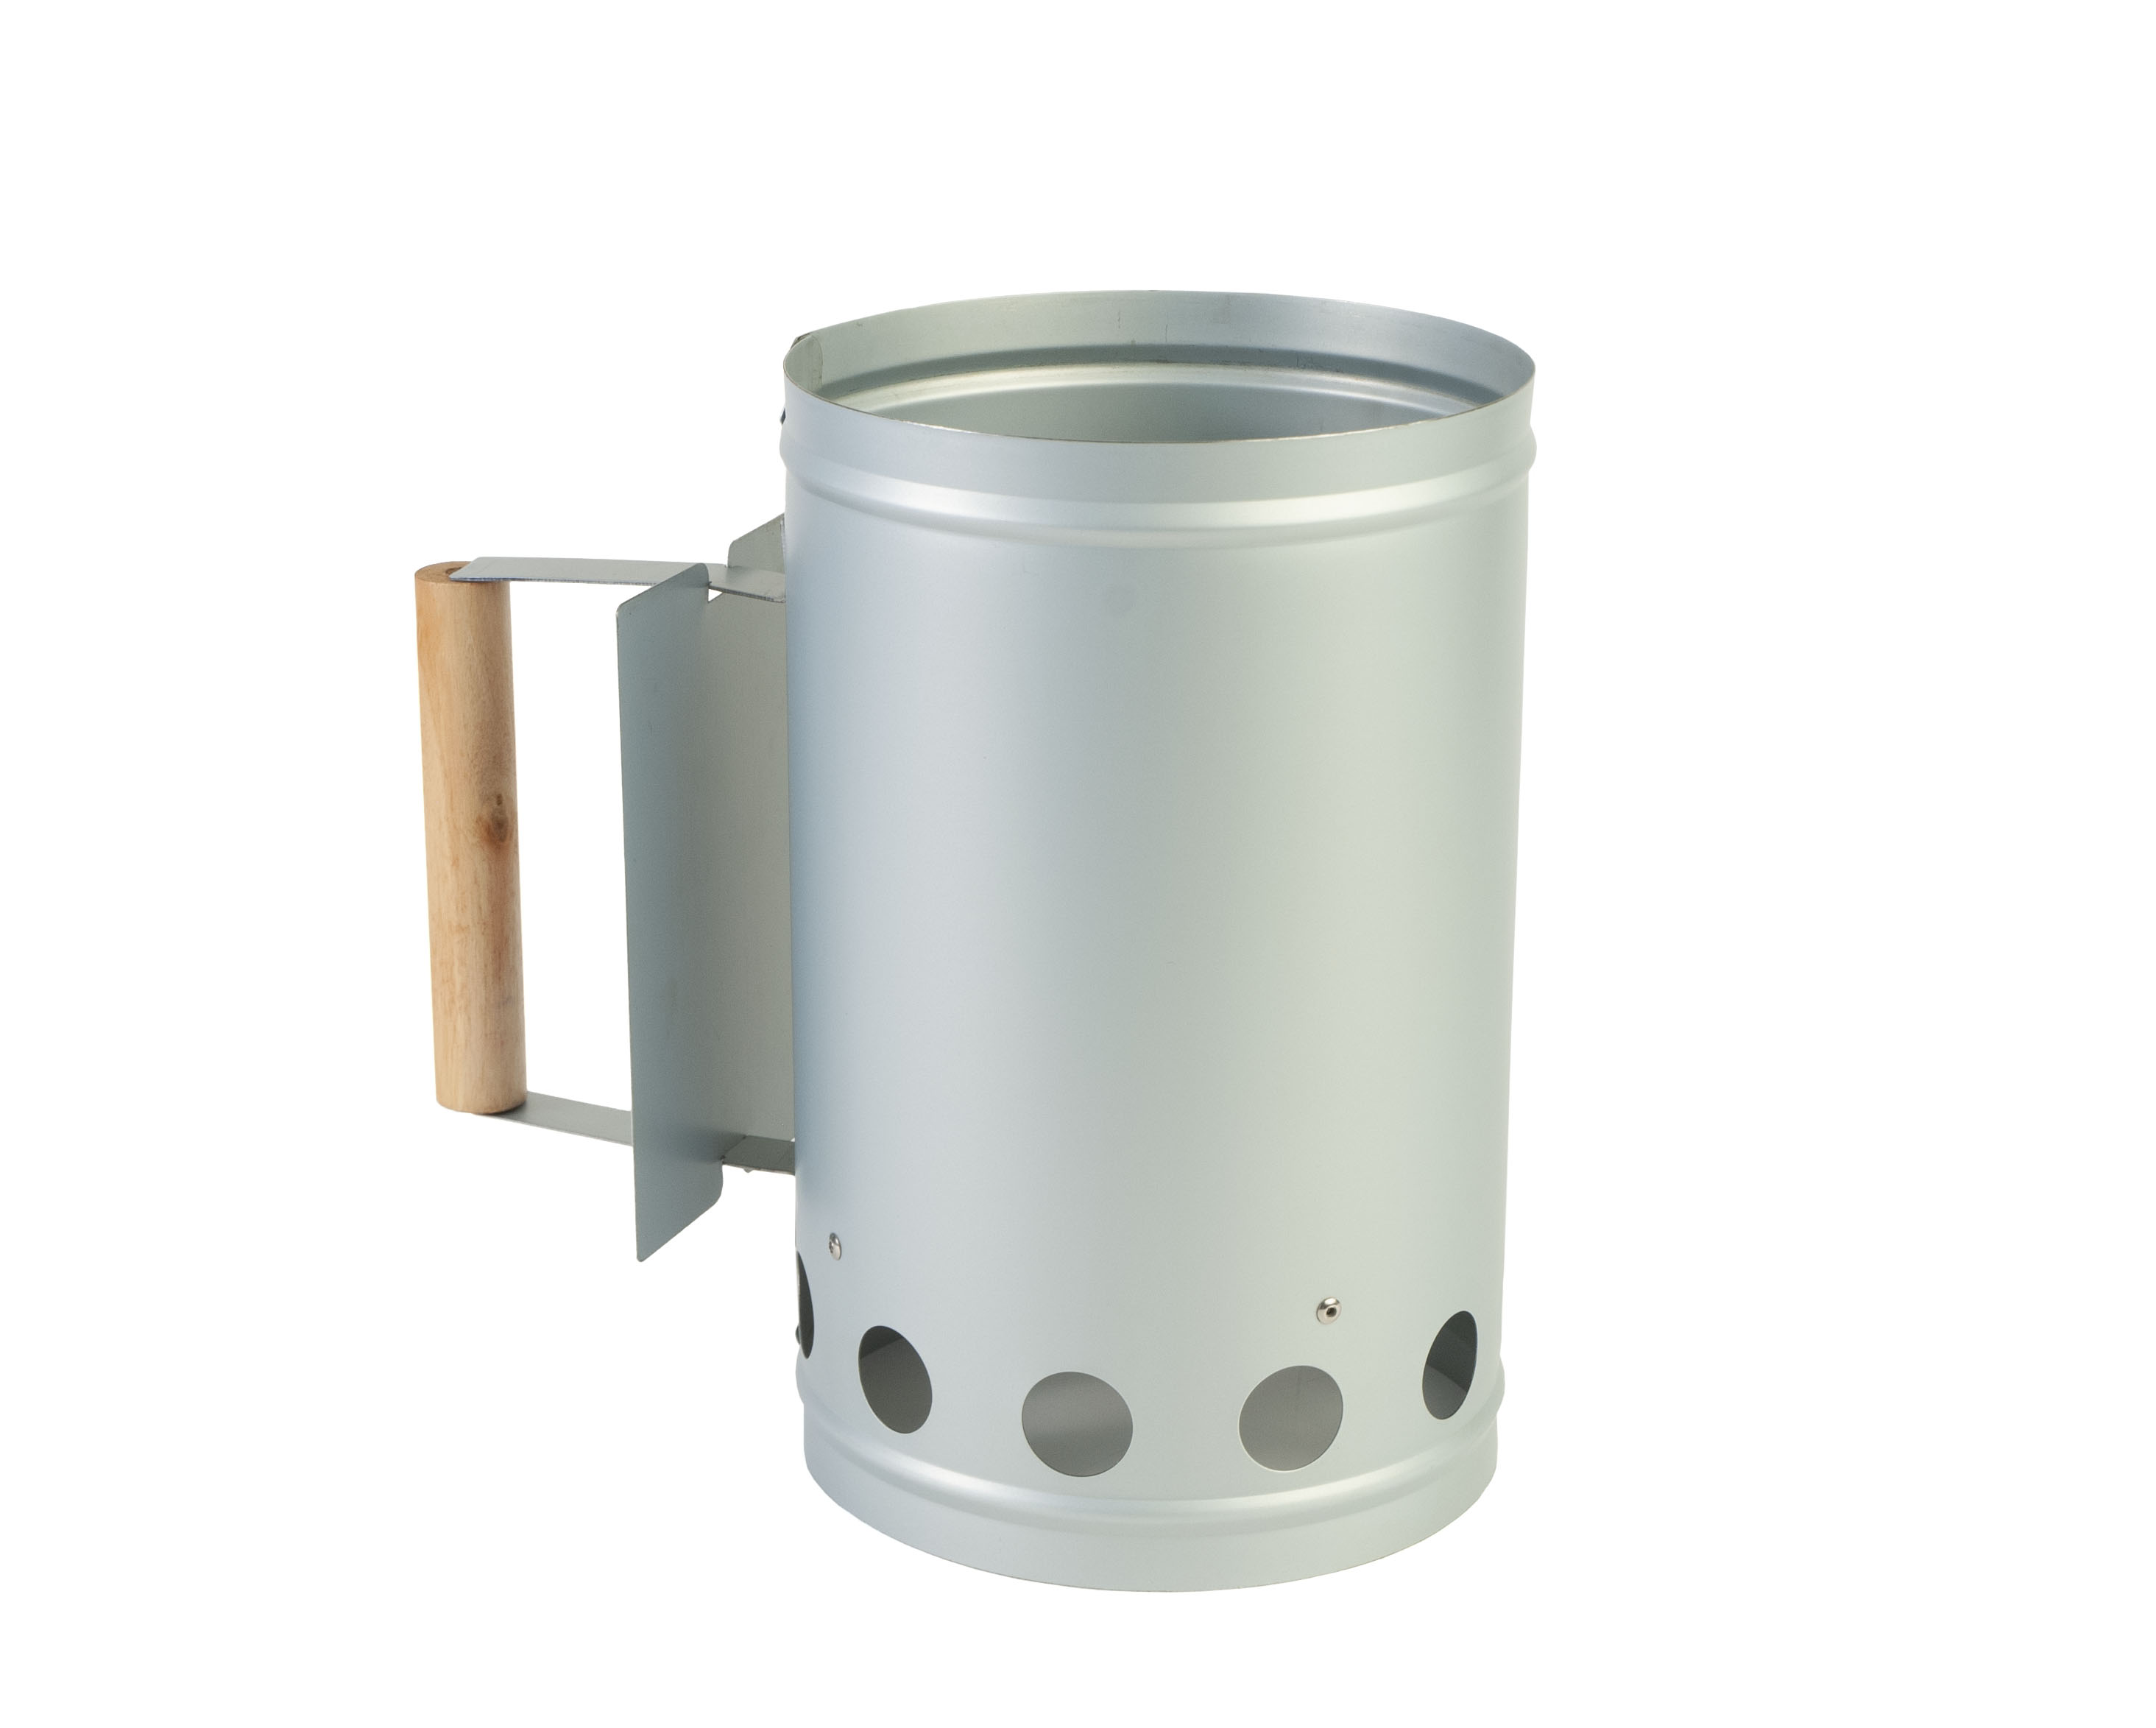 CC4043 Silver Charcoal Chimney Starter - Styled